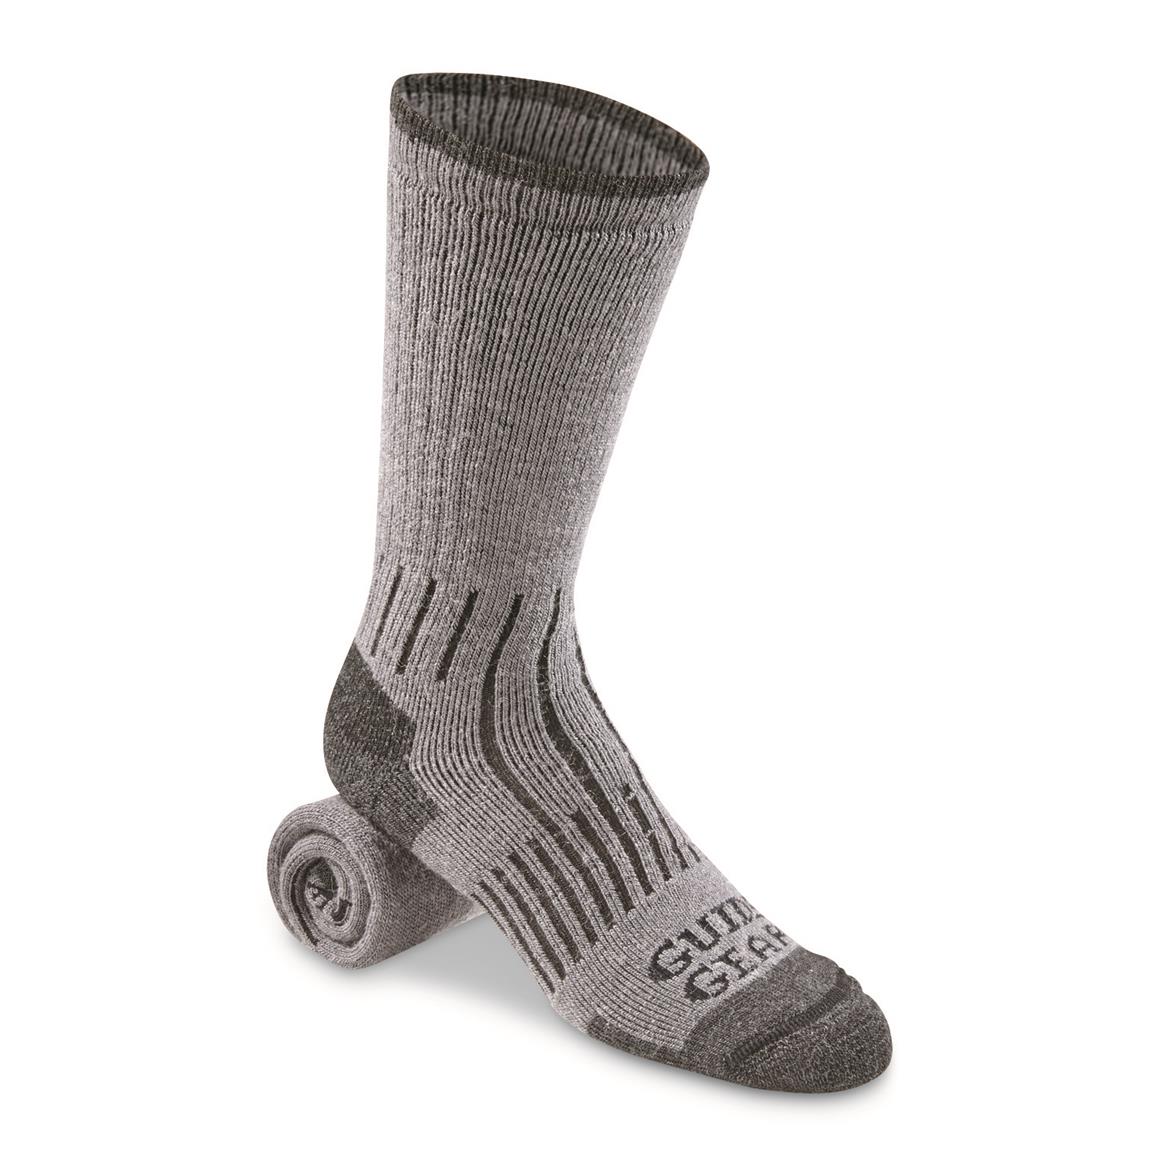 Guide Gear Lifetime Midweight Crew Socks with NanoGLIDE, Charcoal